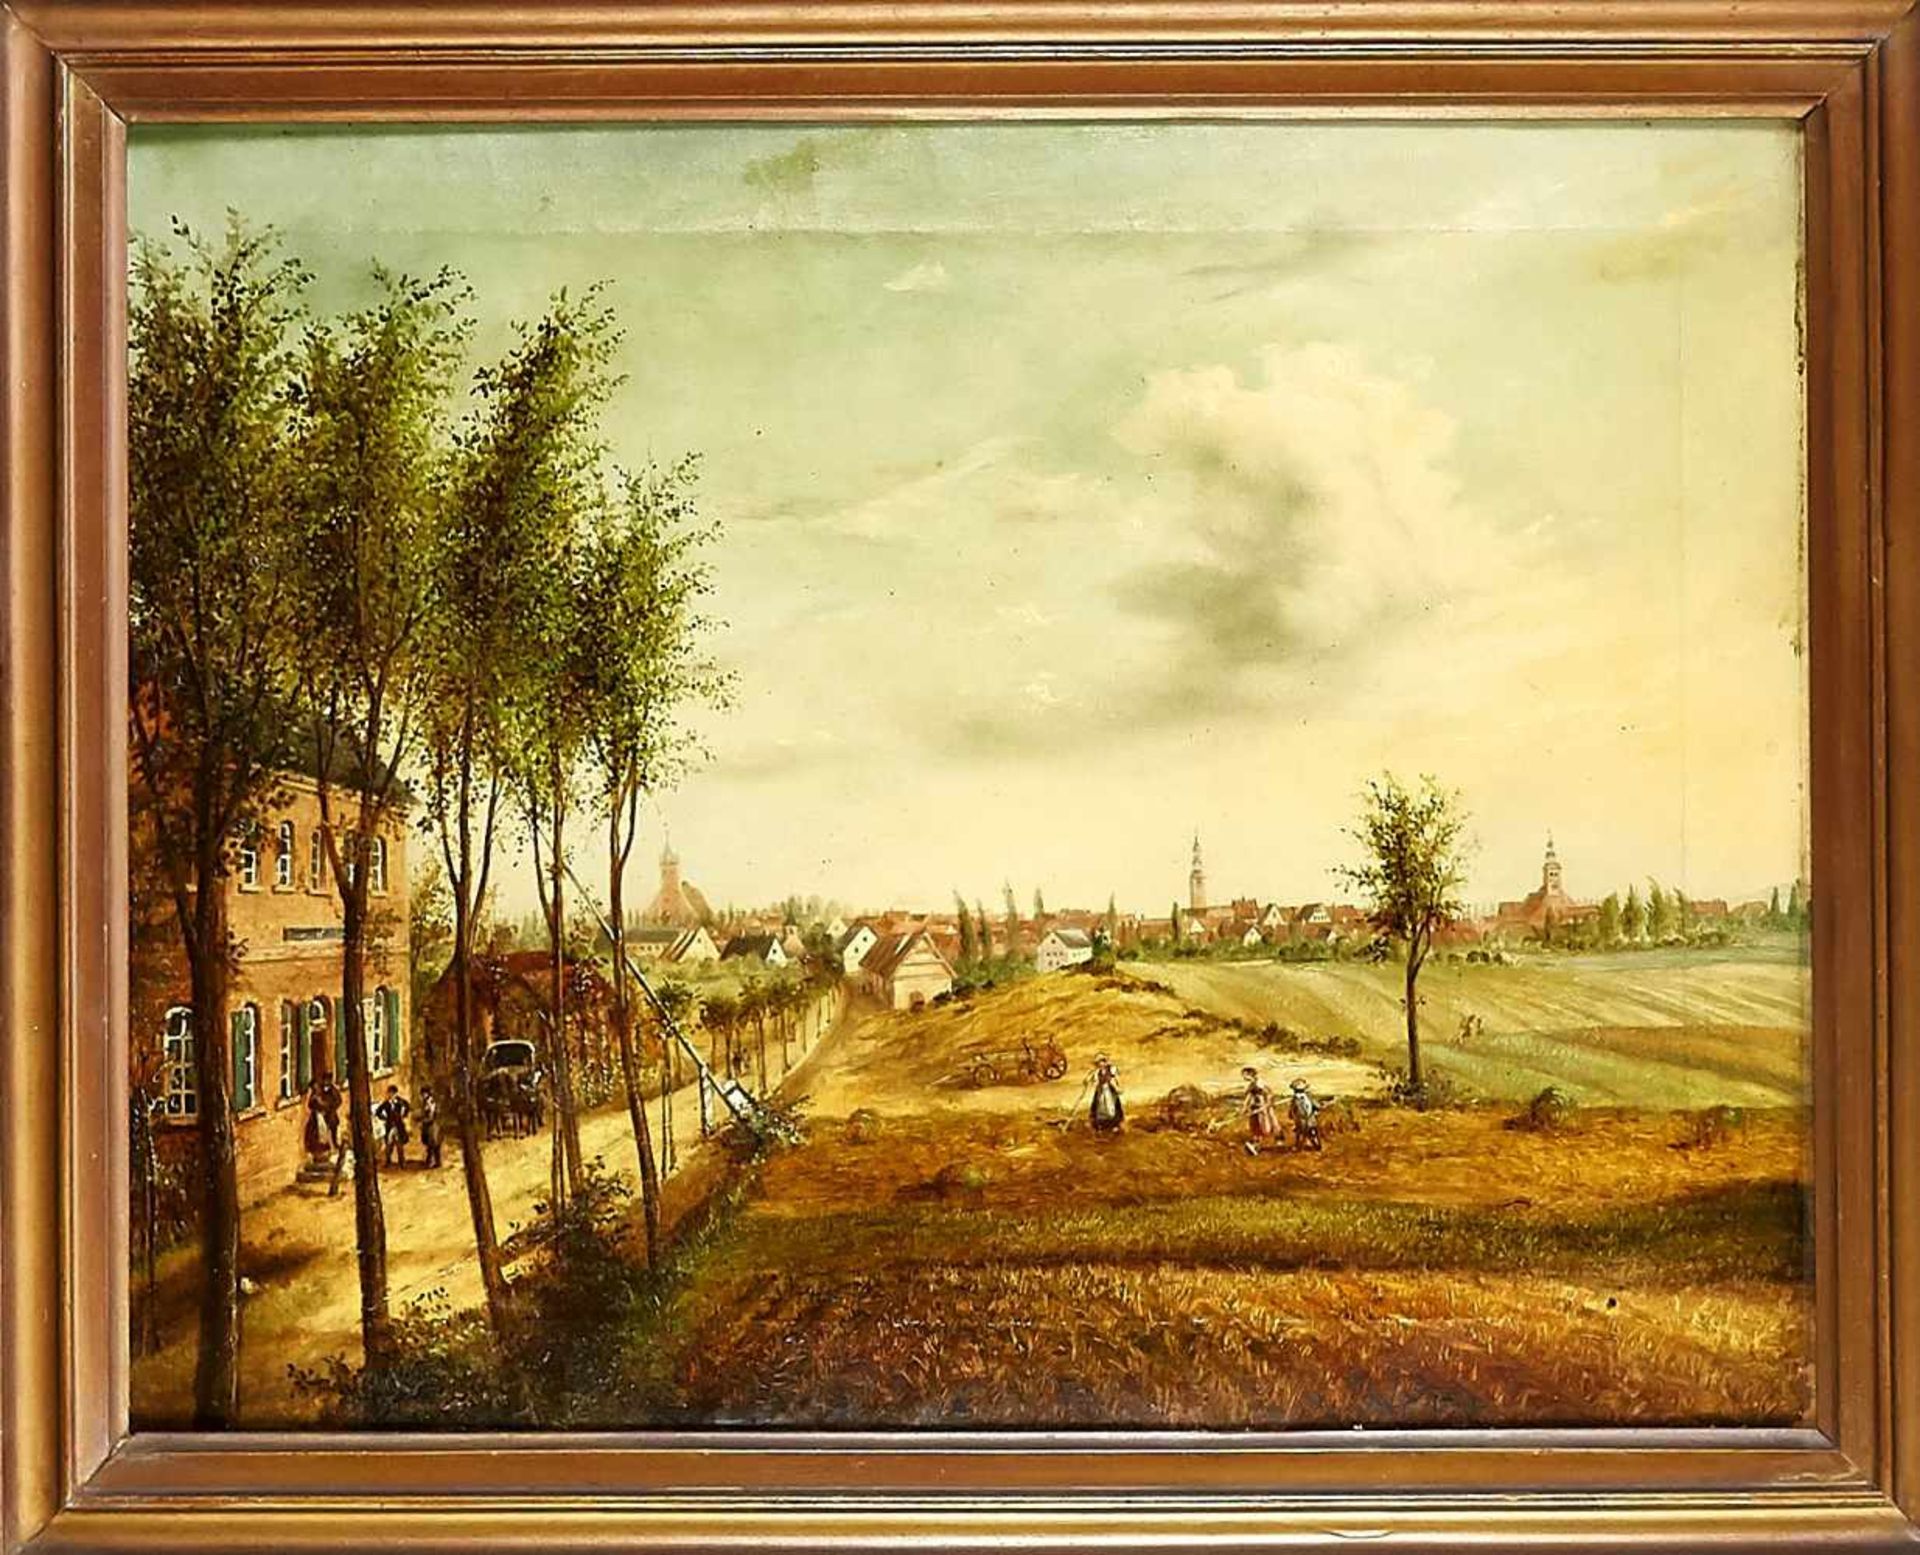 Anonymous painter of the 19th century, city view with haymaking in the foreground andgroup on a